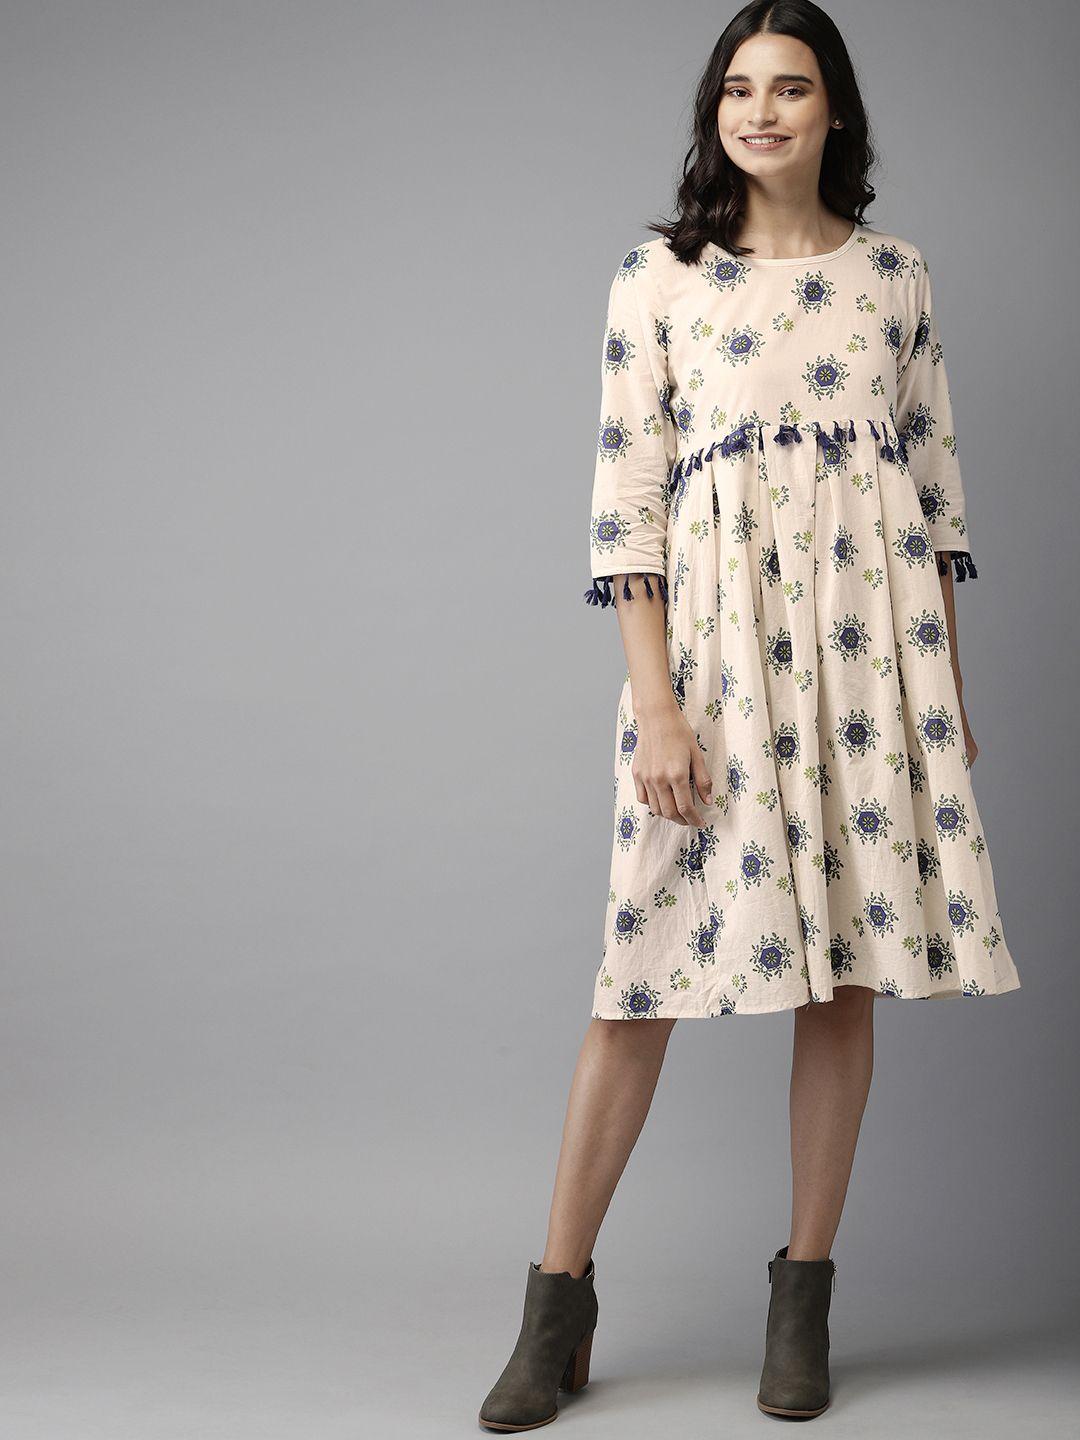 here&now-women-printed-cream-coloured-&-navy-blue-a-line-dress